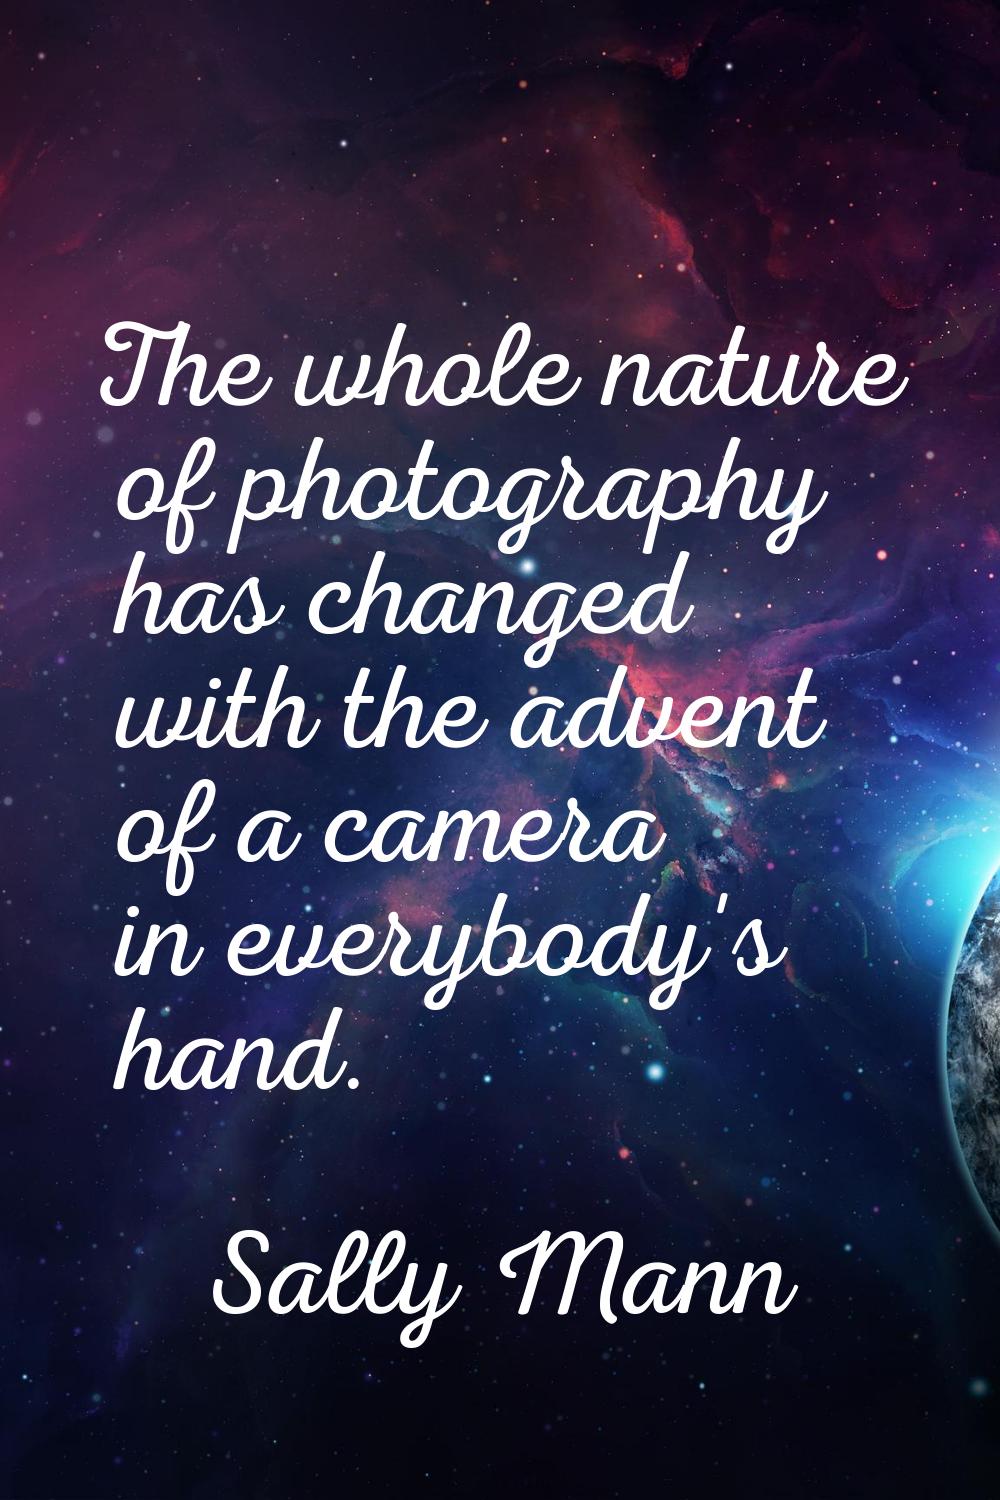 The whole nature of photography has changed with the advent of a camera in everybody's hand.